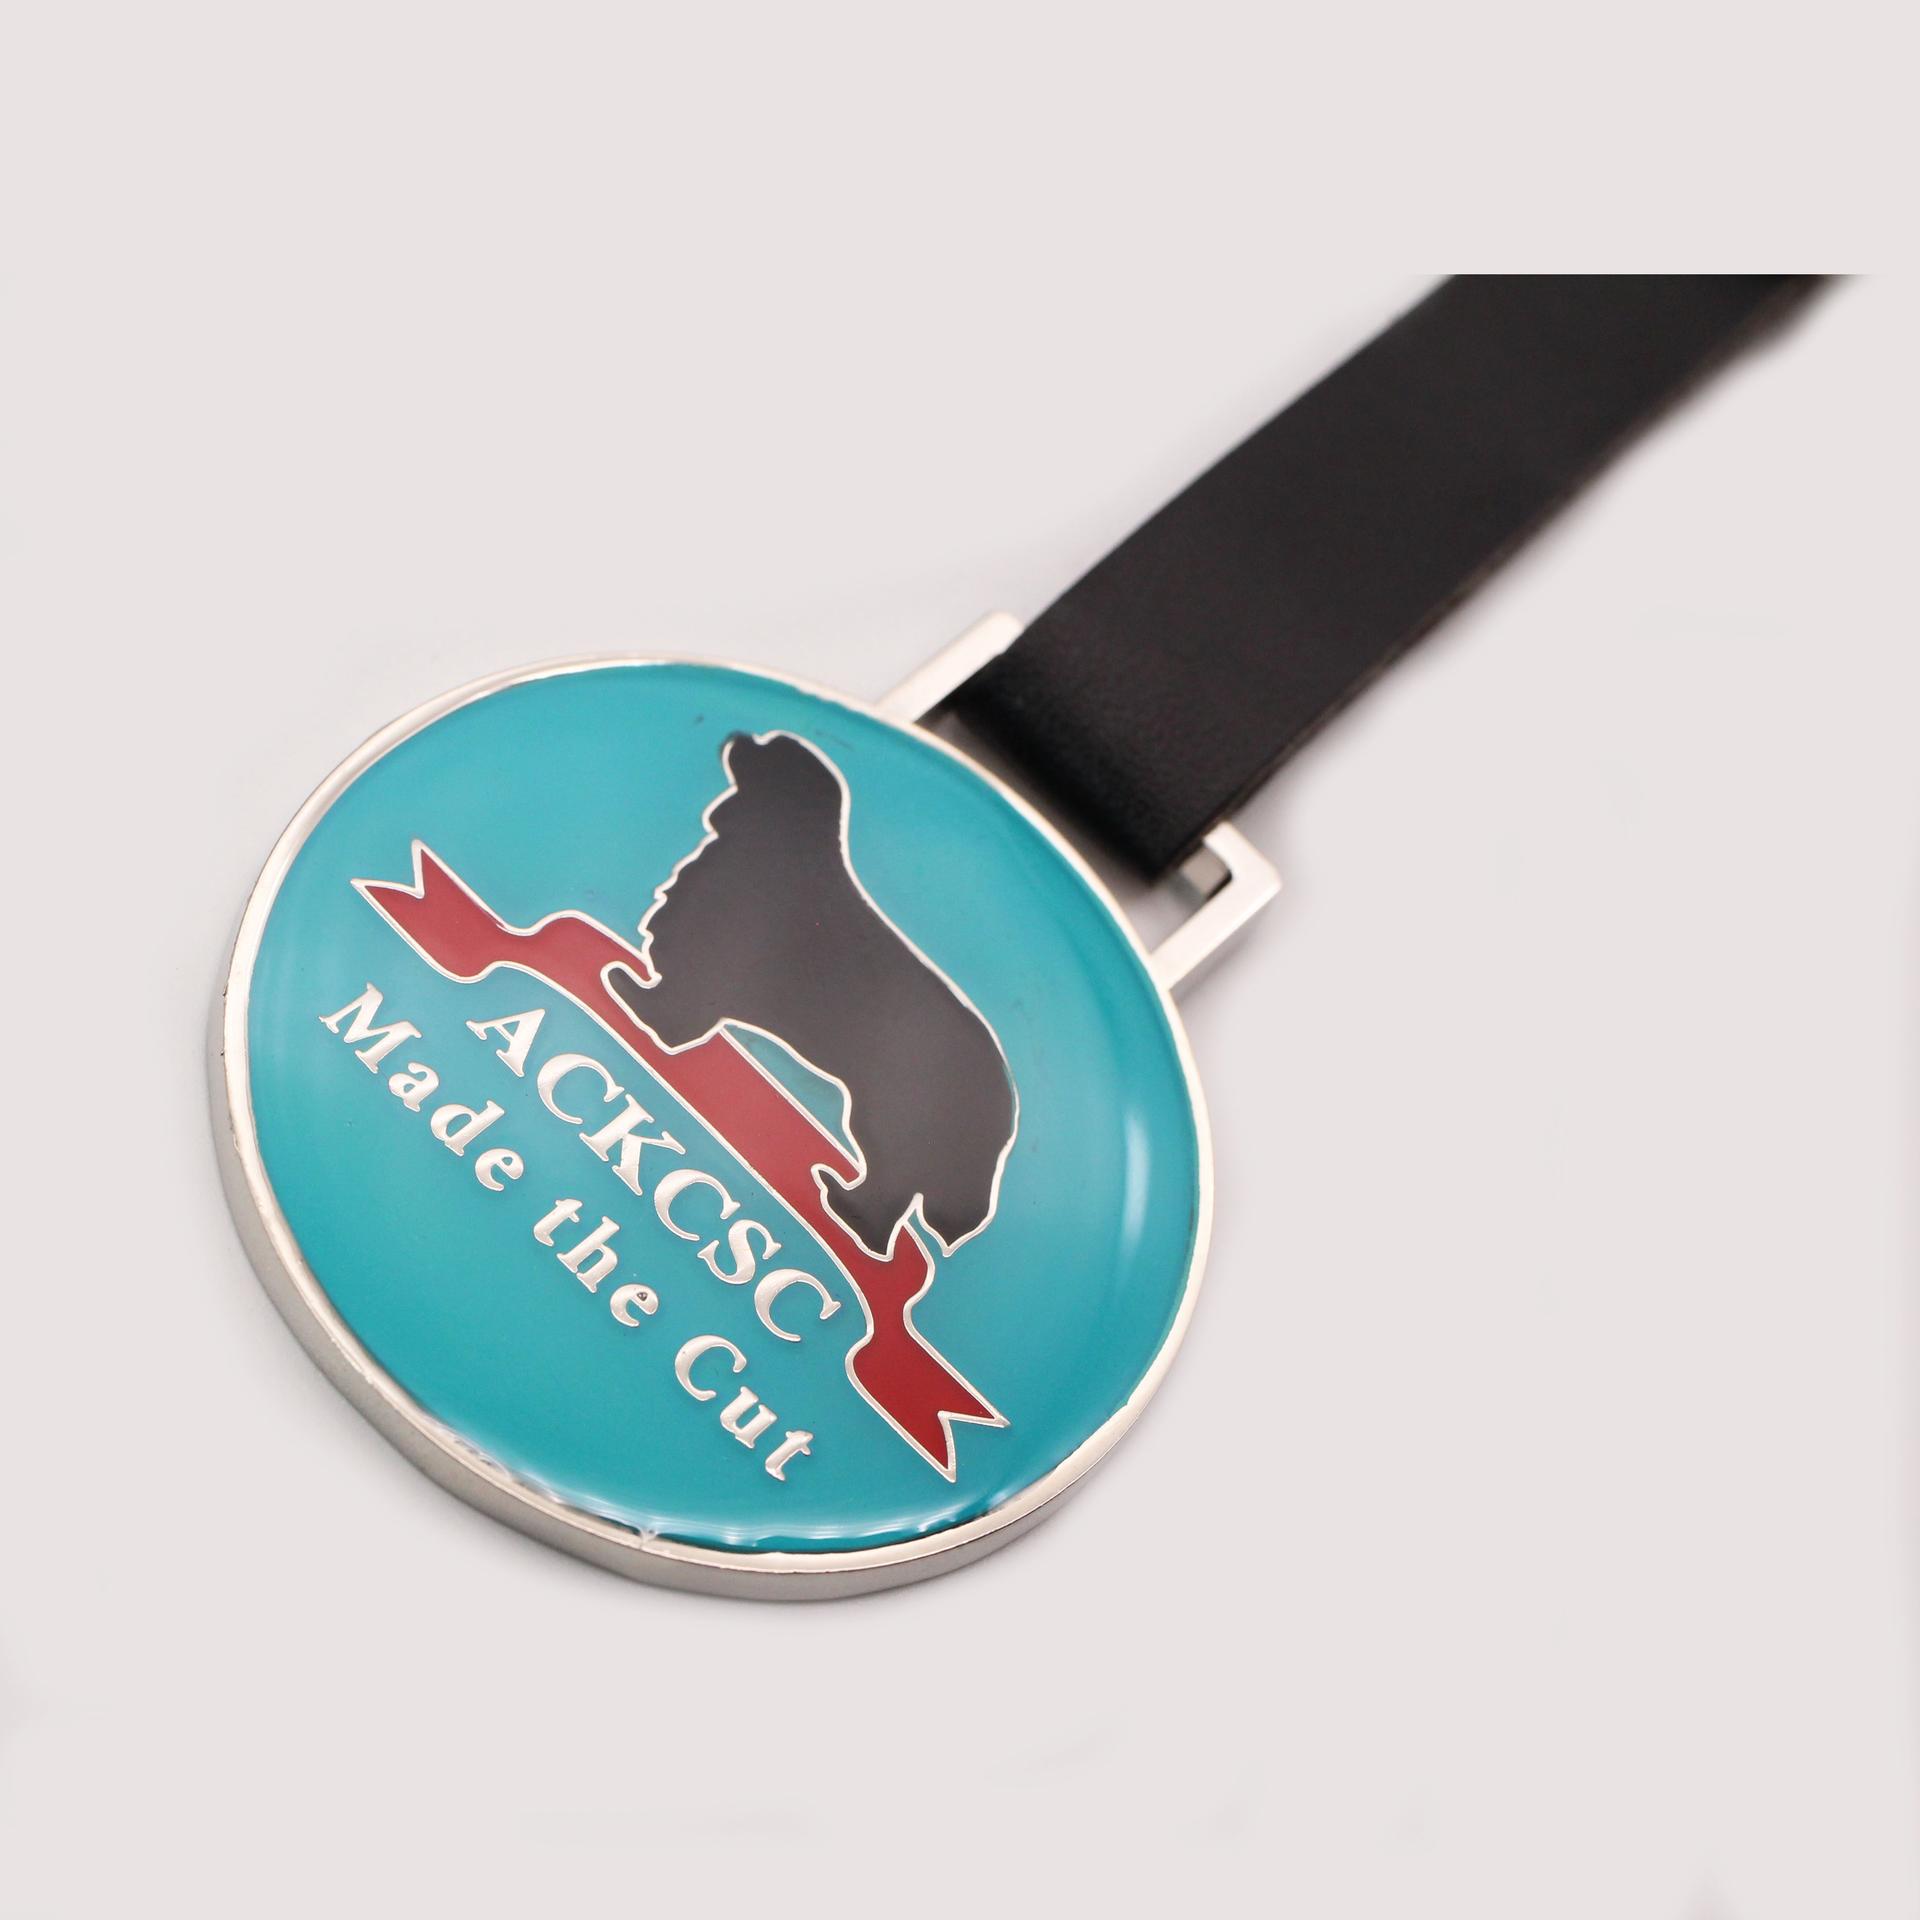 2020 Personalized round metal wholesale club golf tag with pu leather strap